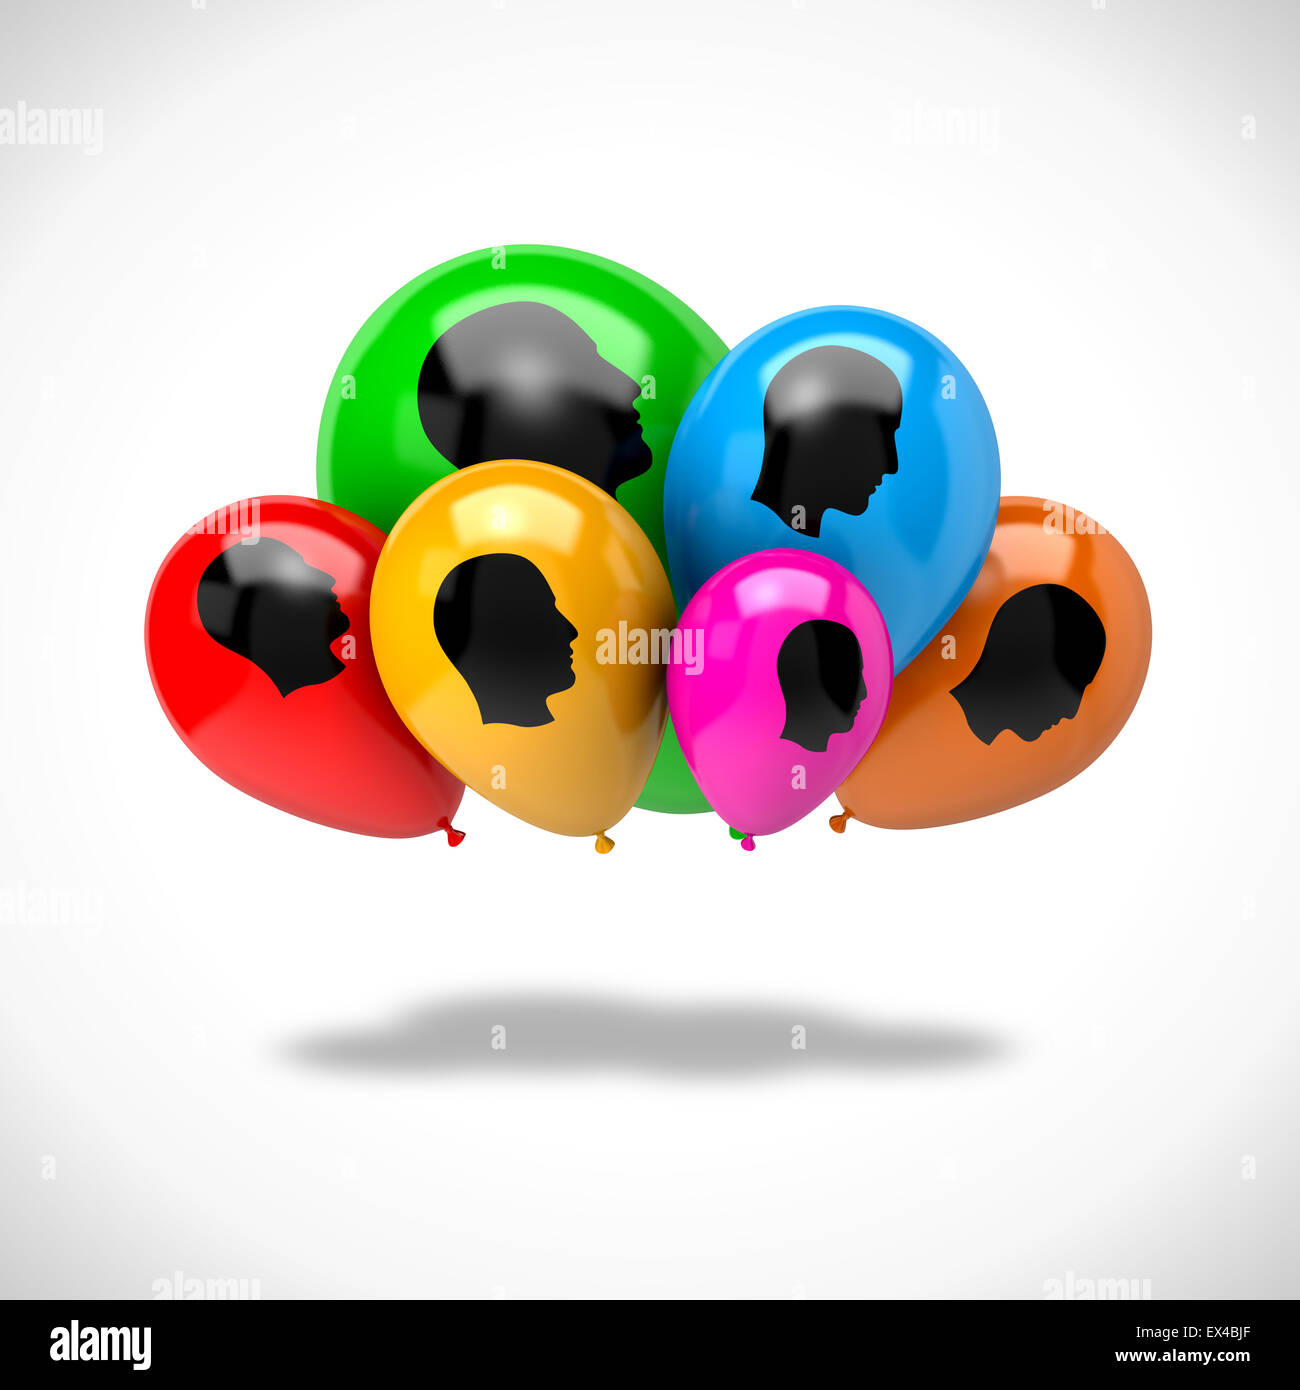 Bunch of Vibrant Color Balloons with Head Profile Symbols on White Background 3D Illustration, Cloud Computing Concept Stock Photo